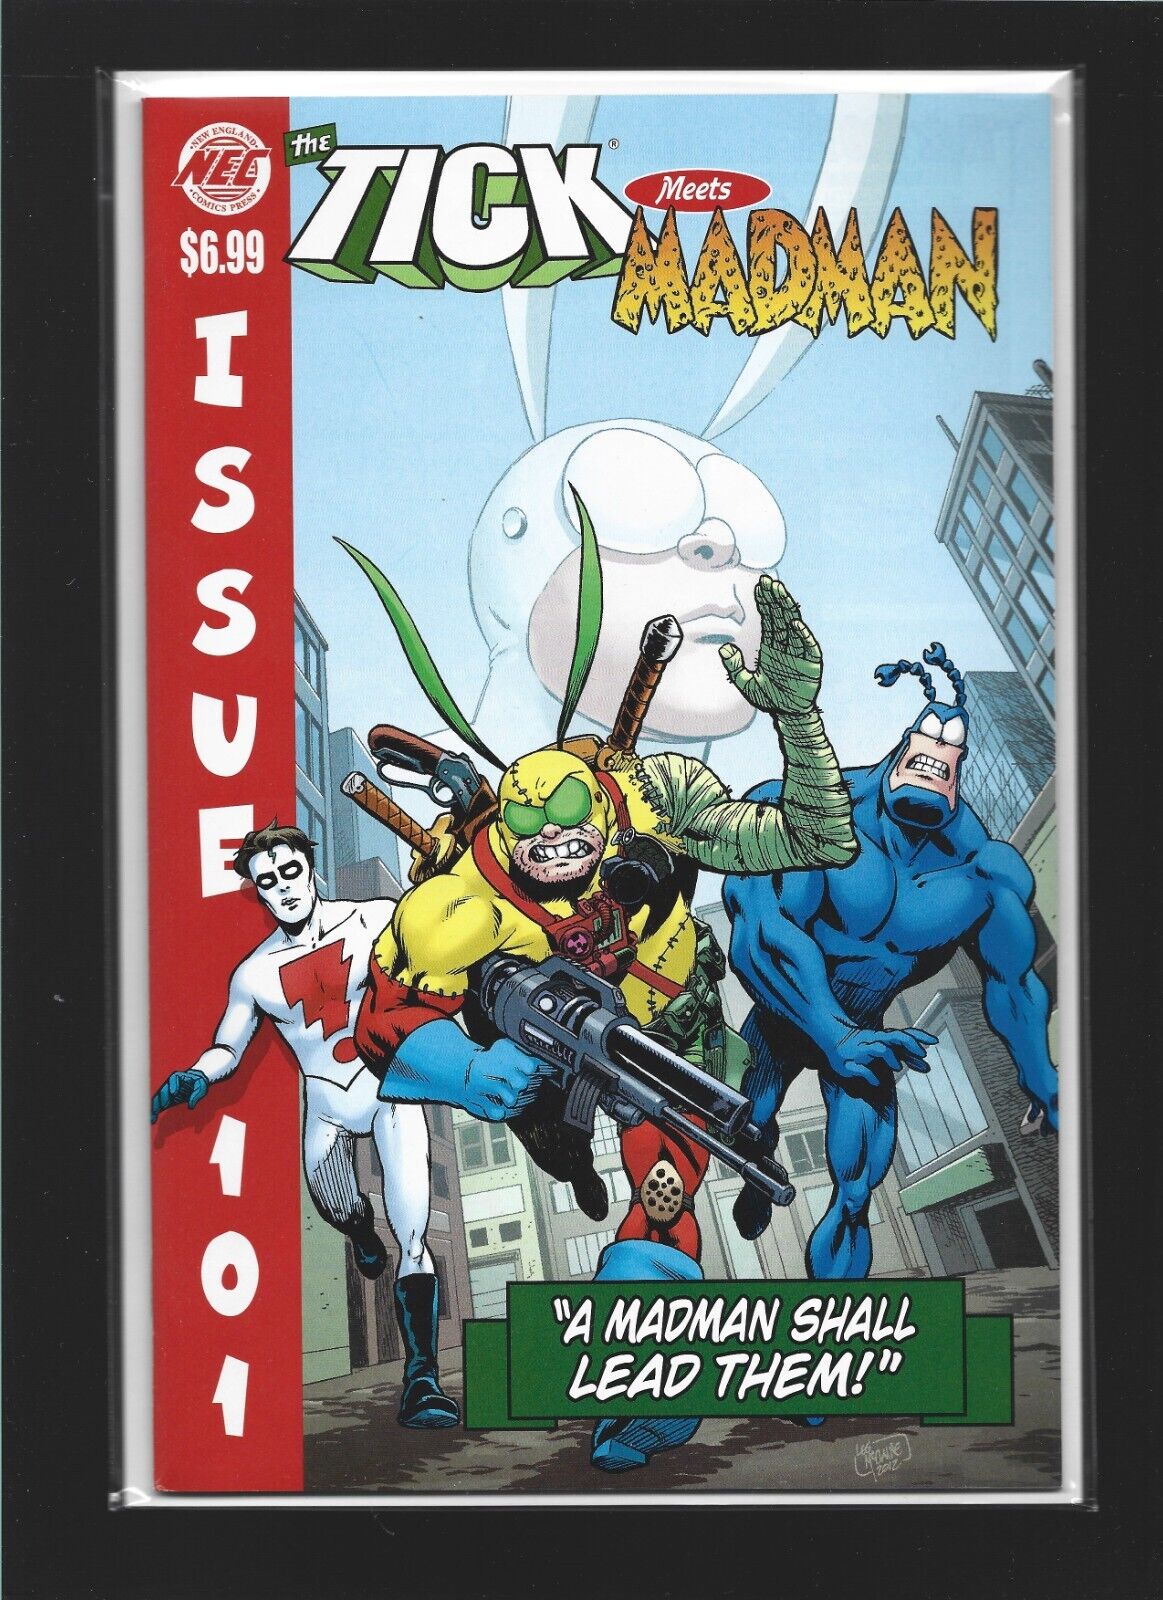 The Tick #101 - the Tick meets Madman